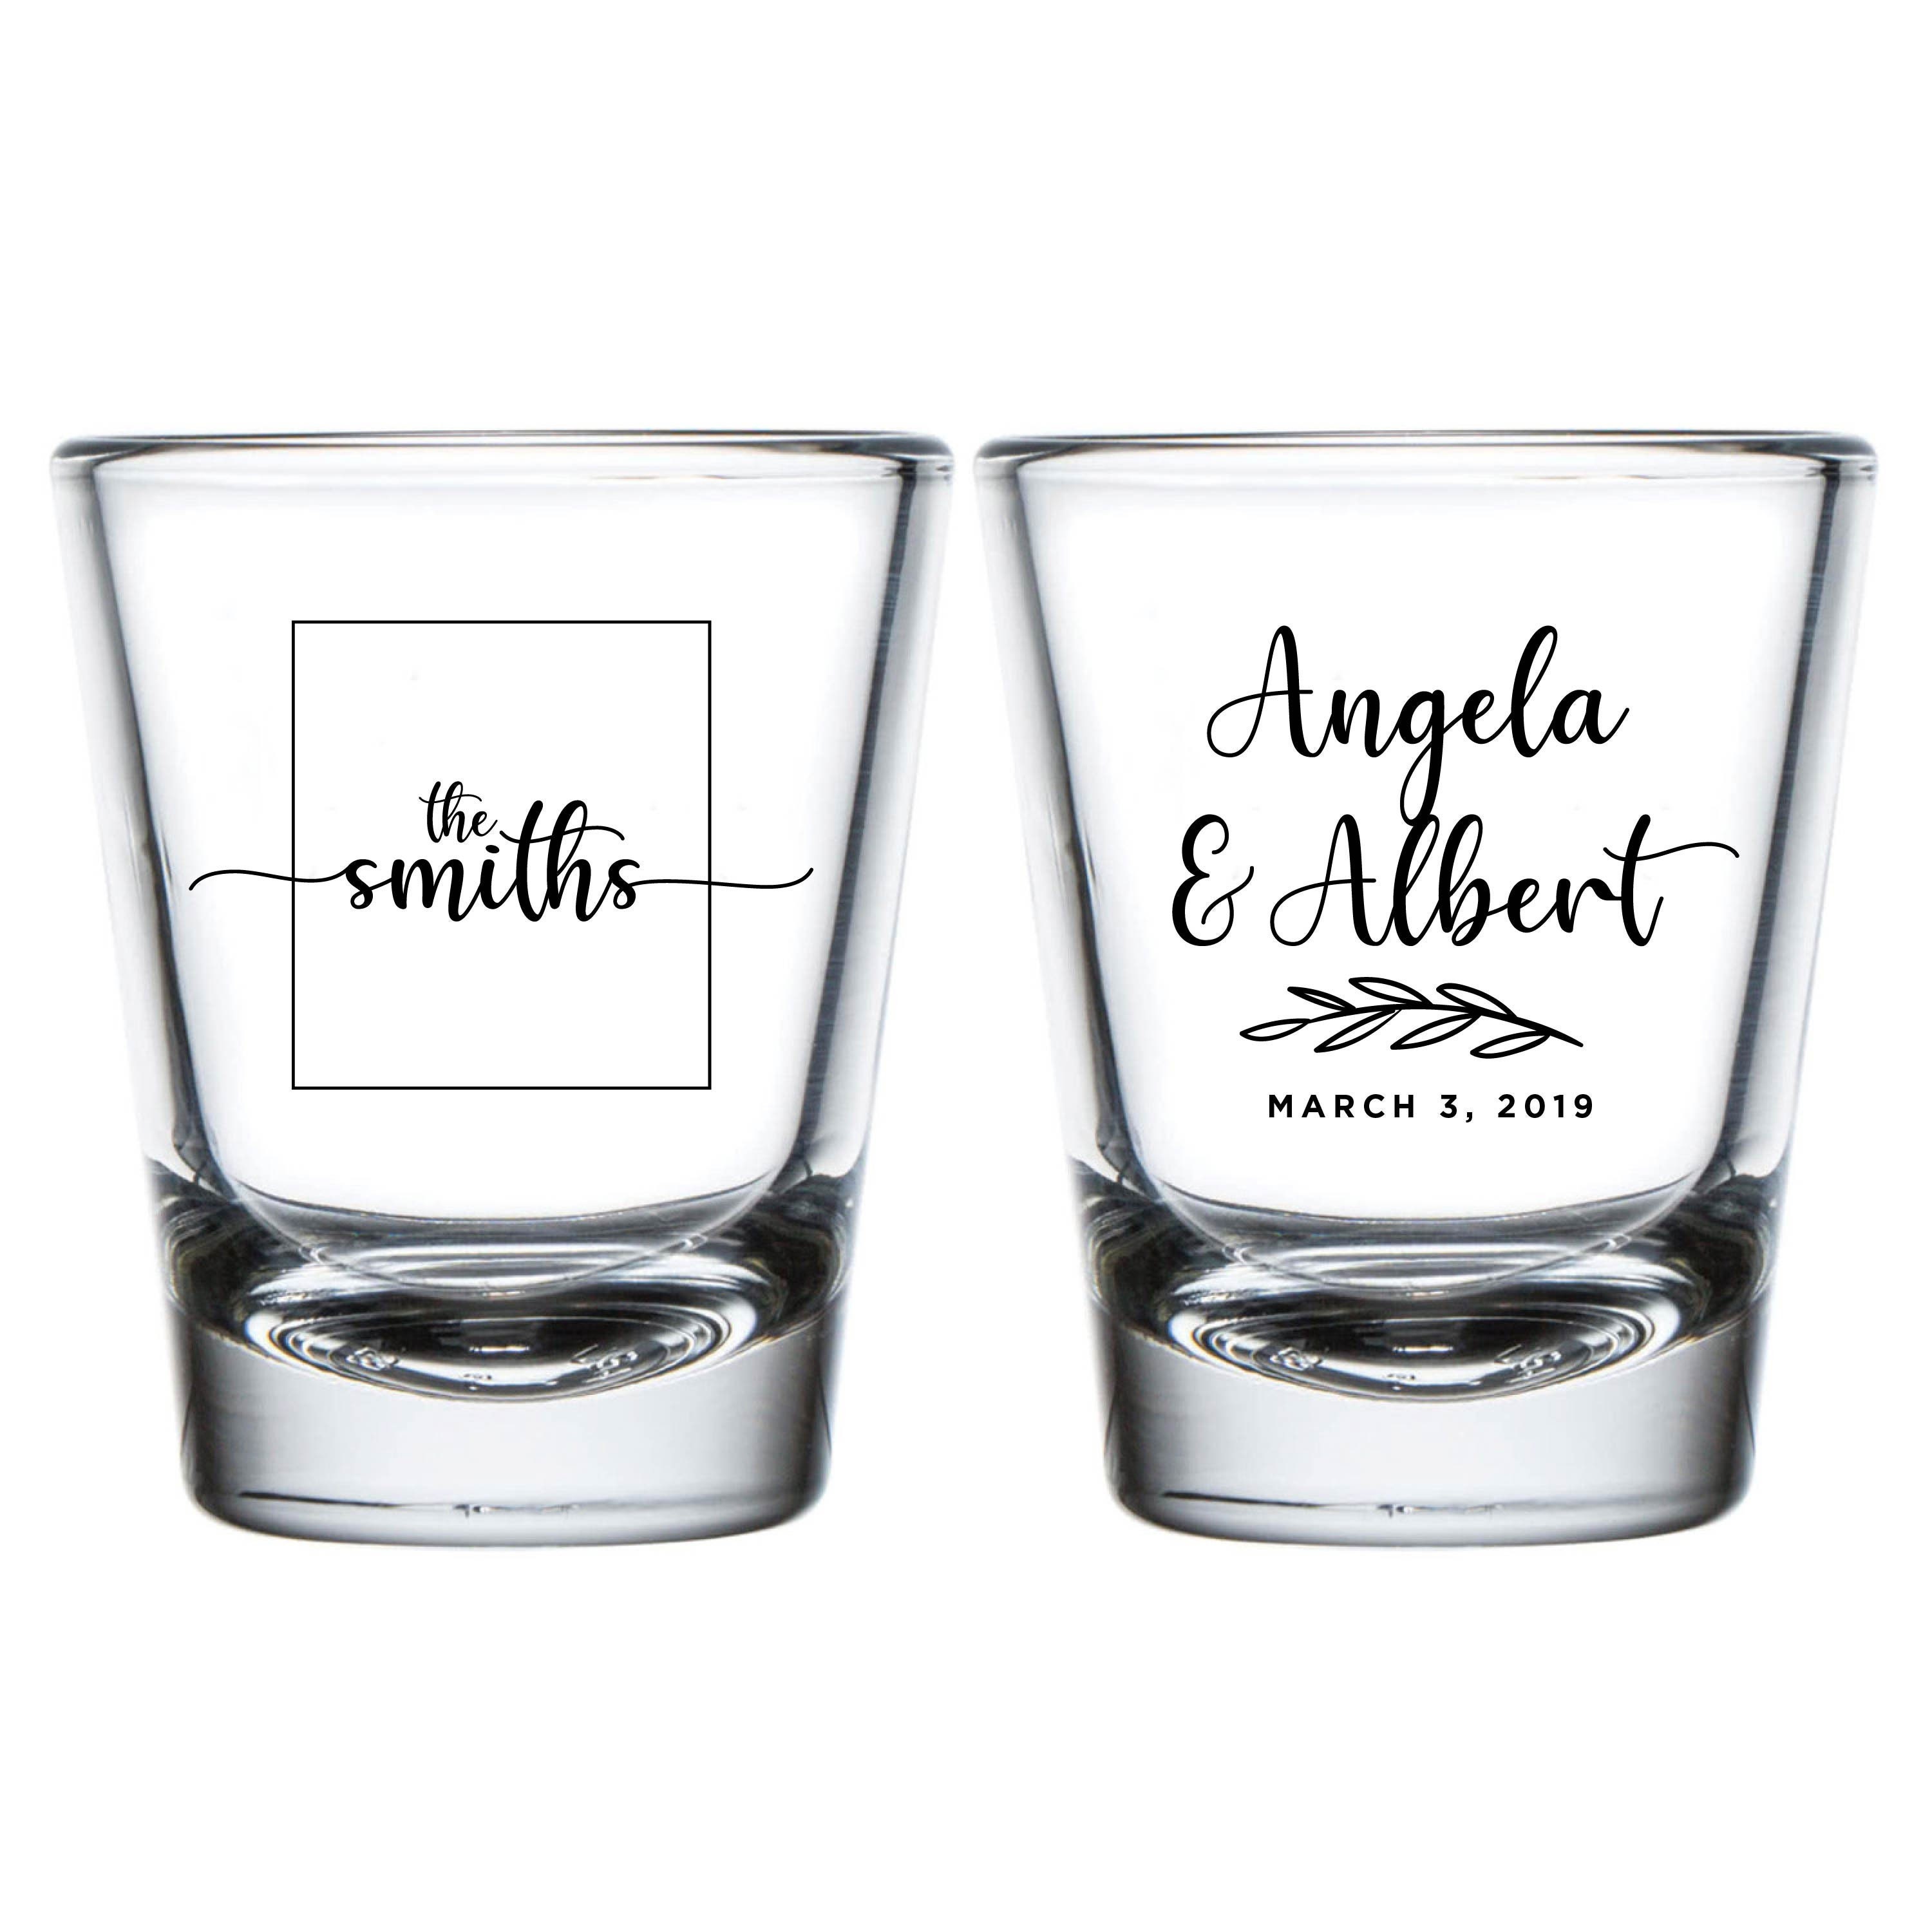 Personalised Engraved Shot Glass Wedding favours Guests toasts drink bride  groom